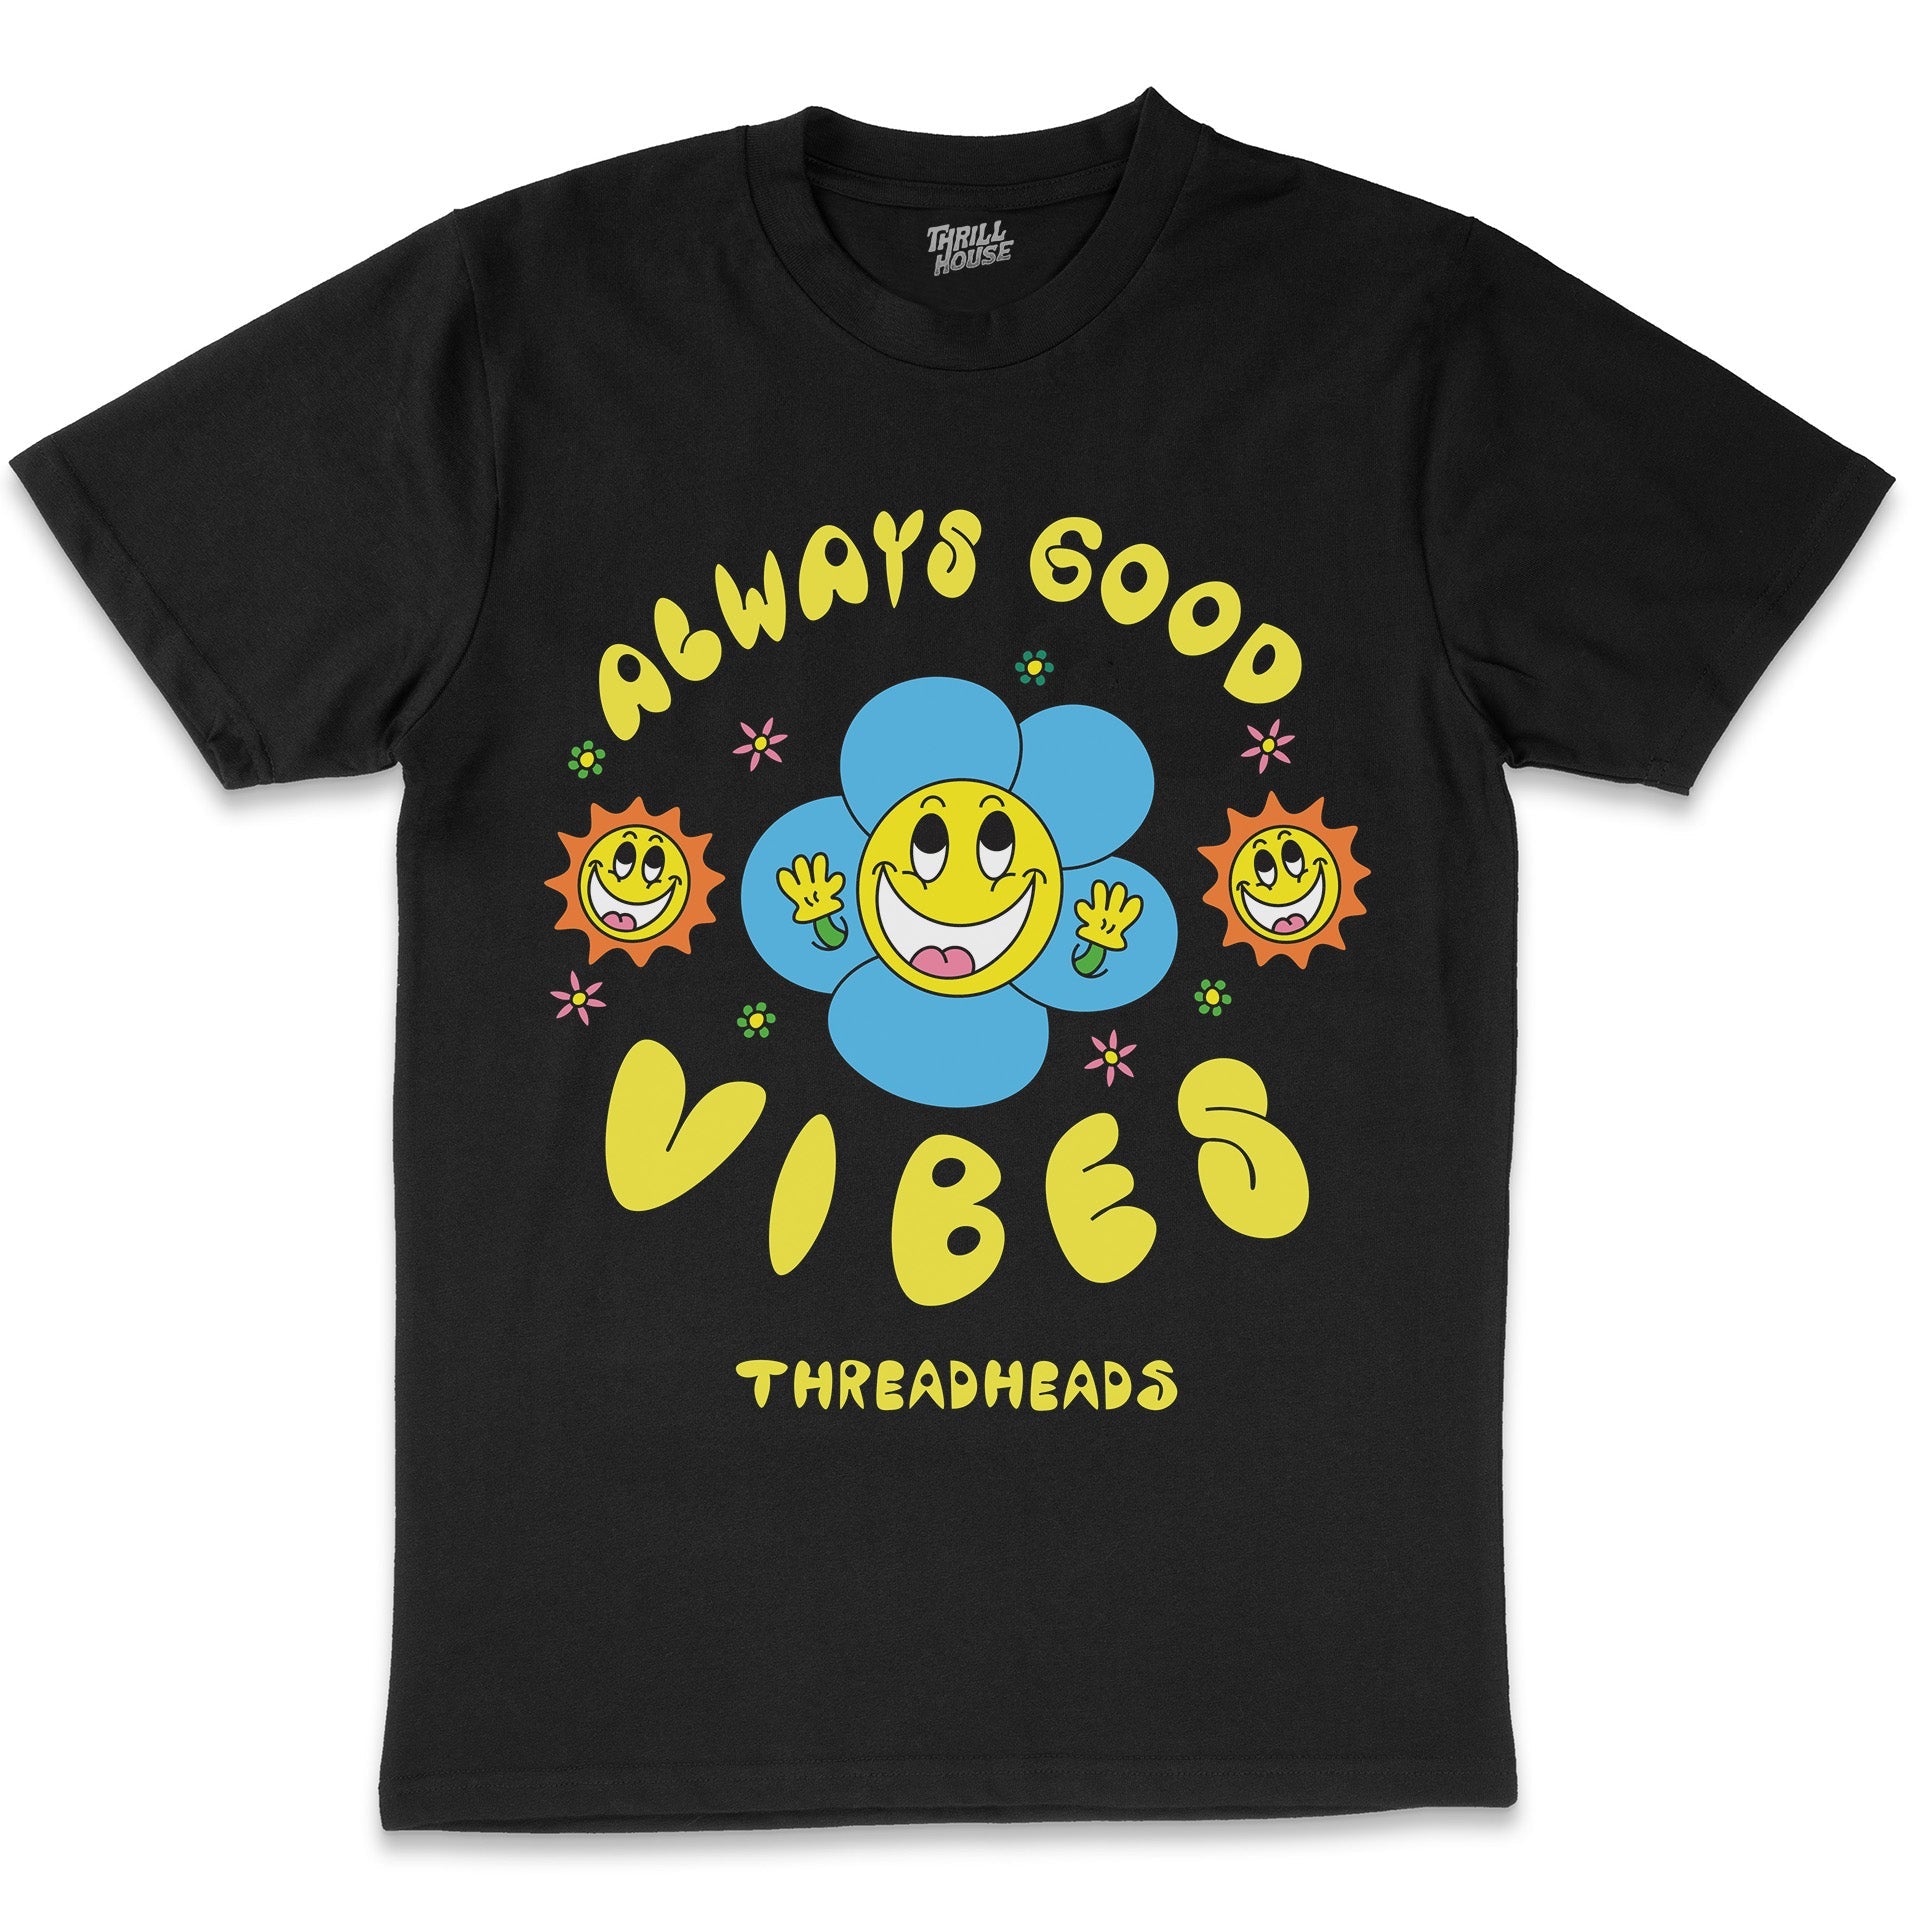 Always Good Vibes Emotion Mental Healthy Positive Flower Nature Hippy Cool Chilled Cotton T-Shirt